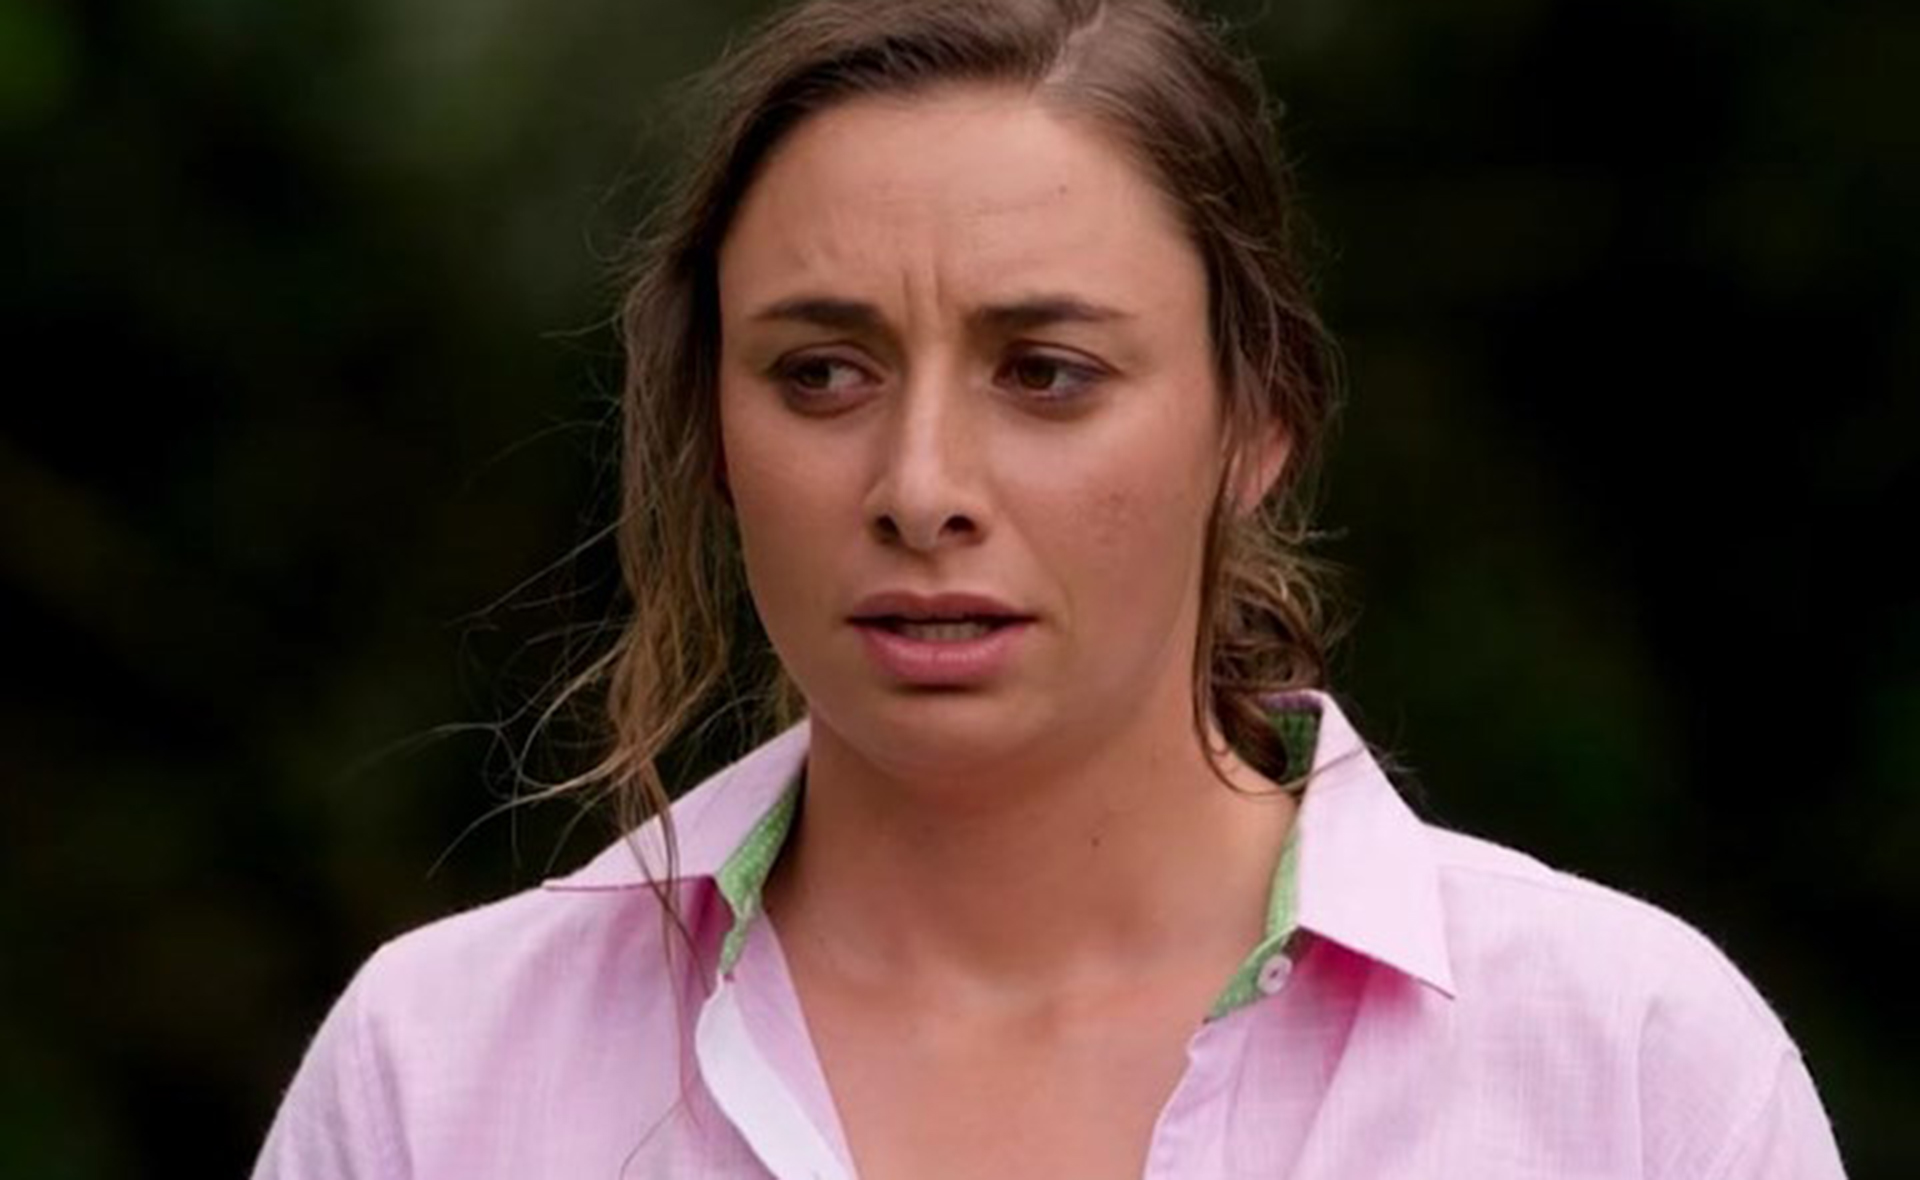 “Your love story ends here”: Paige quits Farmer Wants A Wife in a shock walk-out